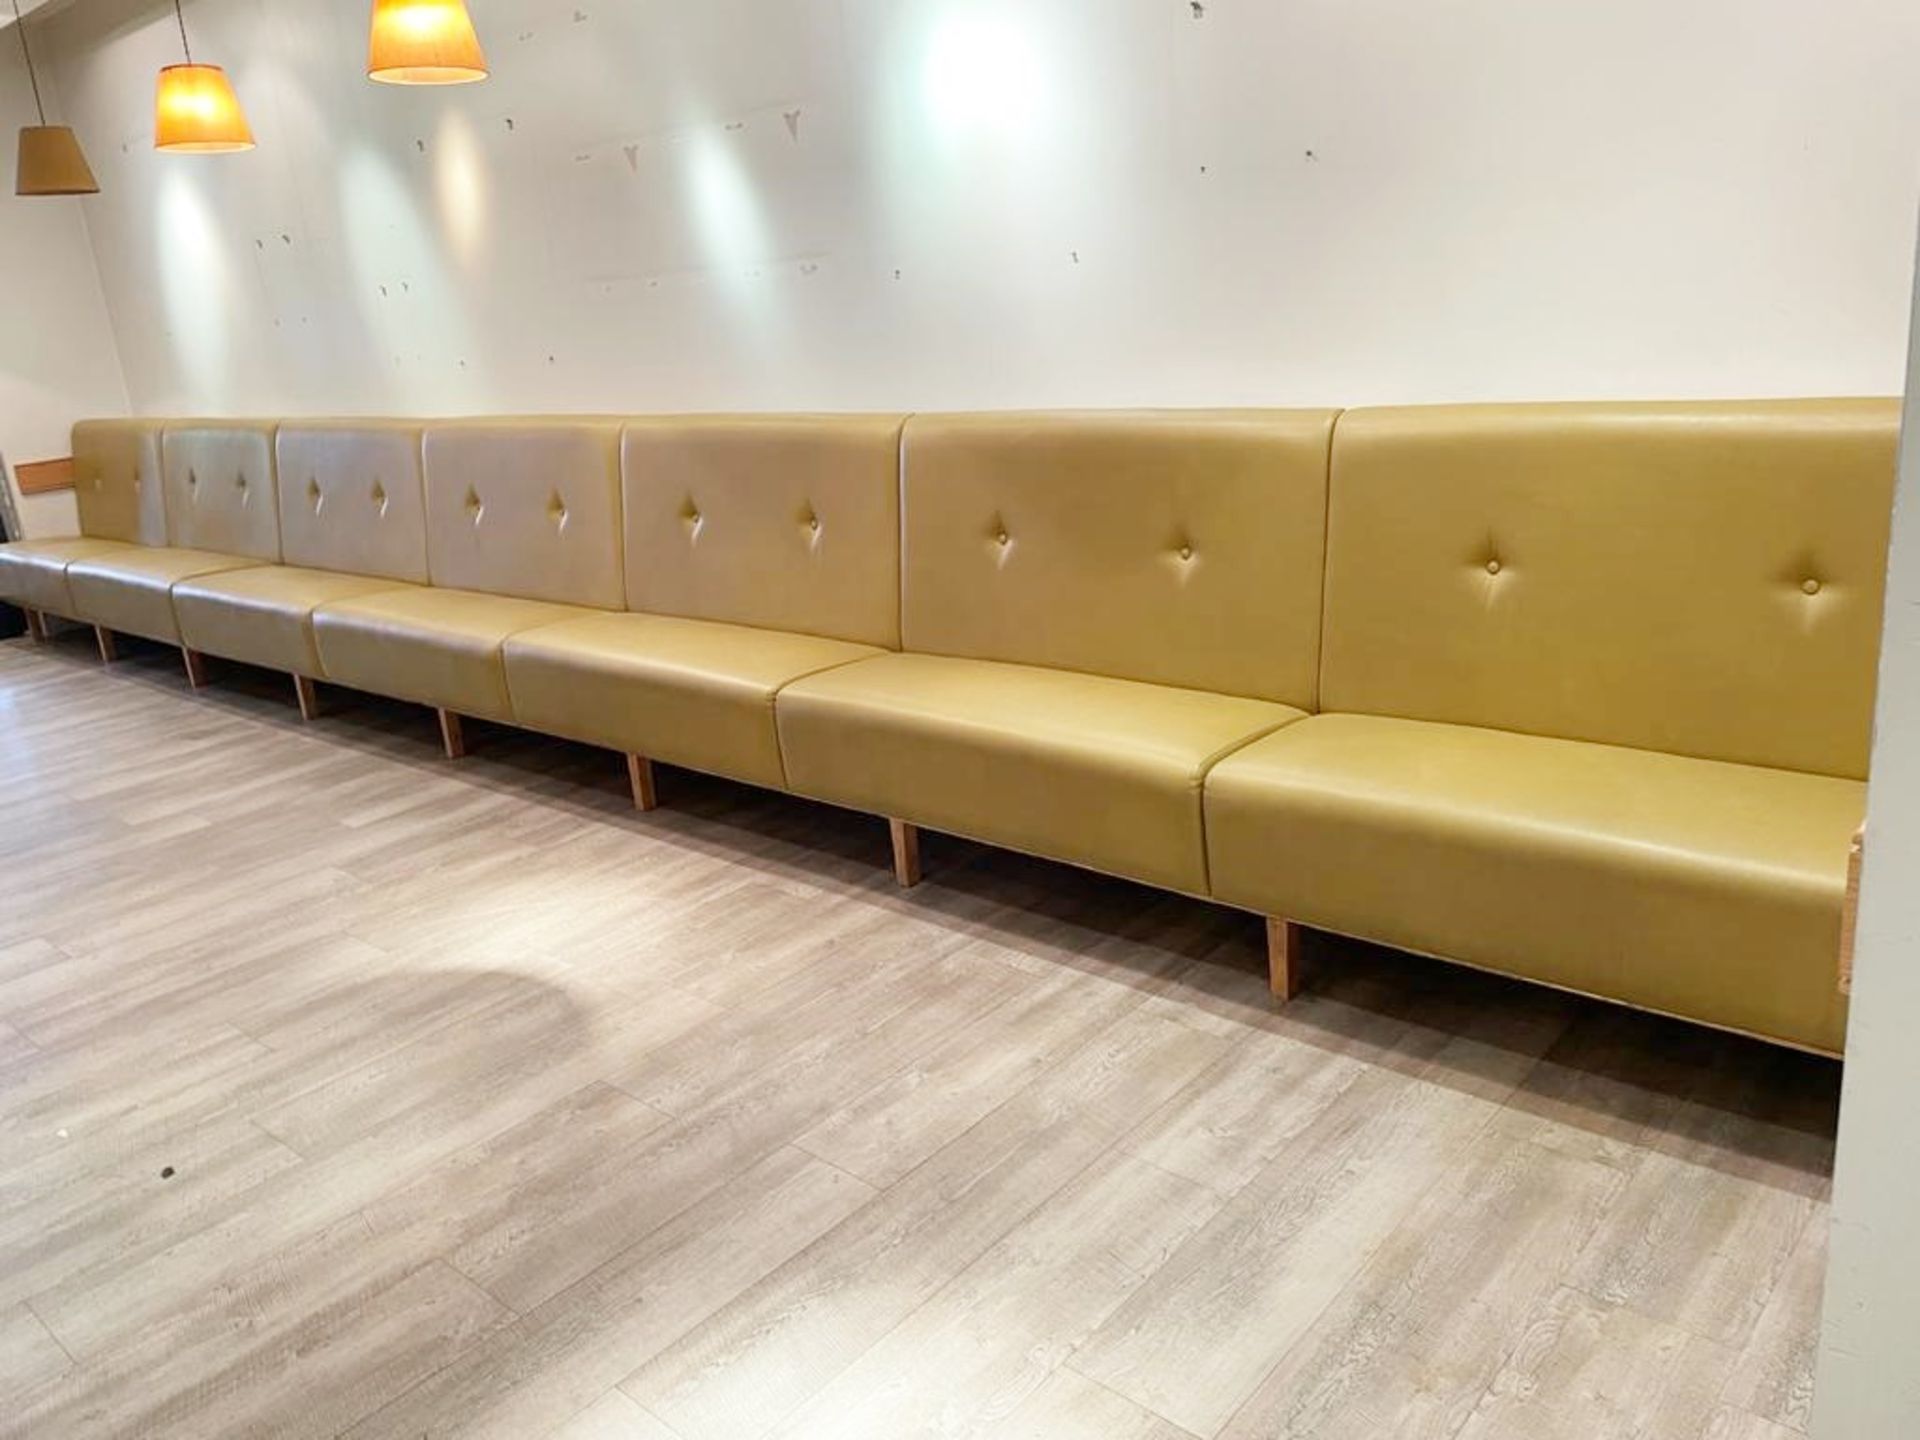 1 x Contemporary 27ft Seating Bench Upholstered With Button Back Leather in Mustard - Dimensions: - Image 13 of 13